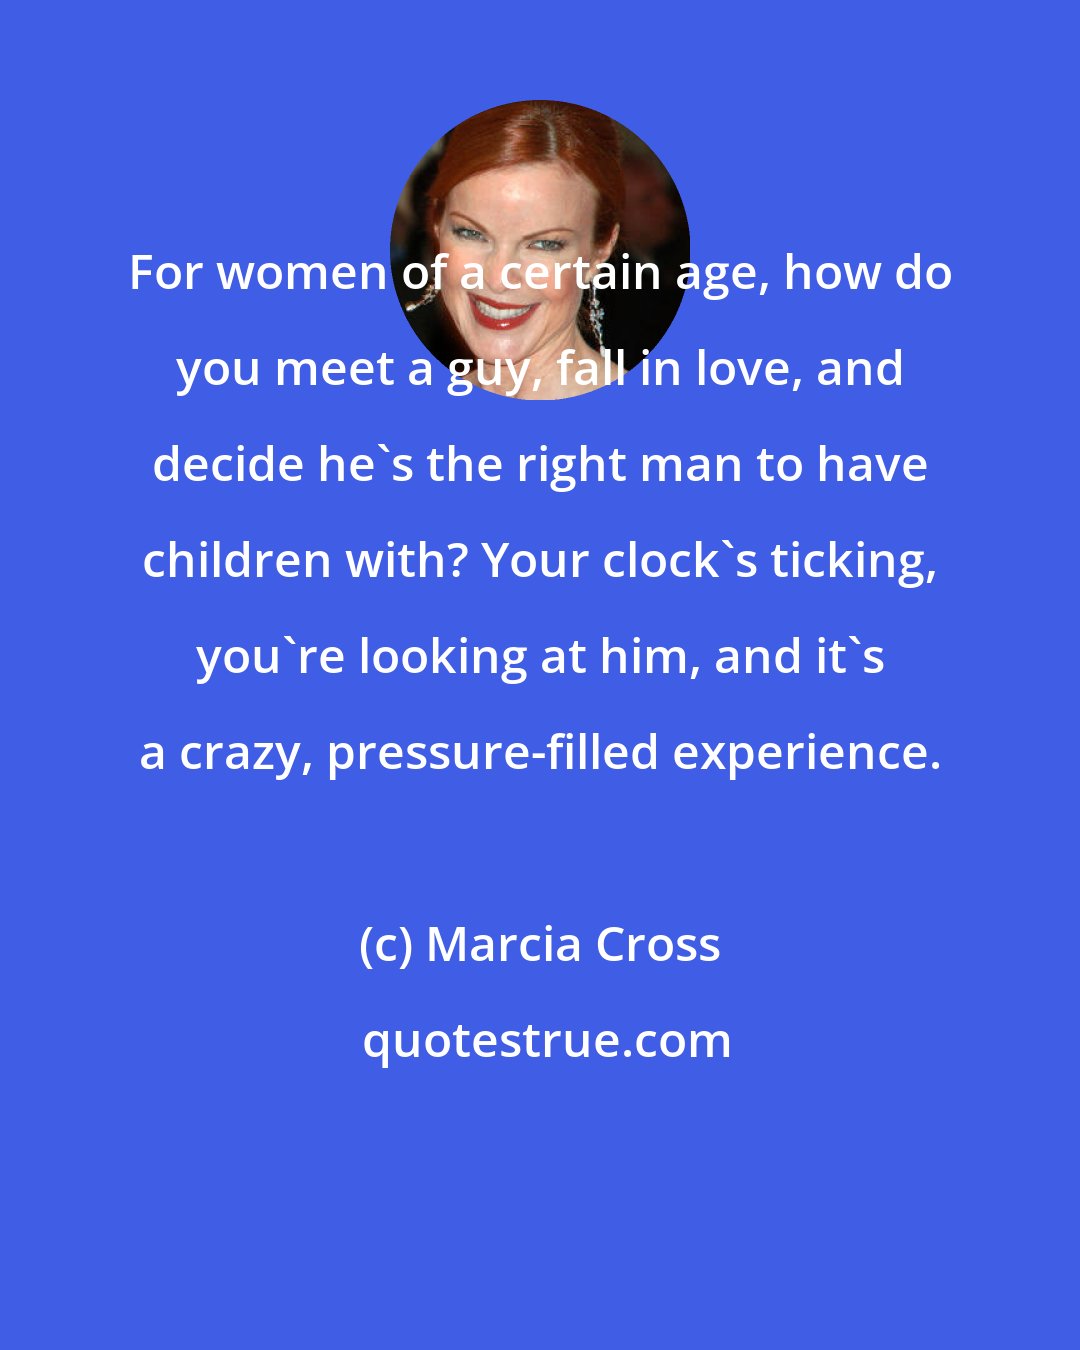 Marcia Cross: For women of a certain age, how do you meet a guy, fall in love, and decide he's the right man to have children with? Your clock's ticking, you're looking at him, and it's a crazy, pressure-filled experience.